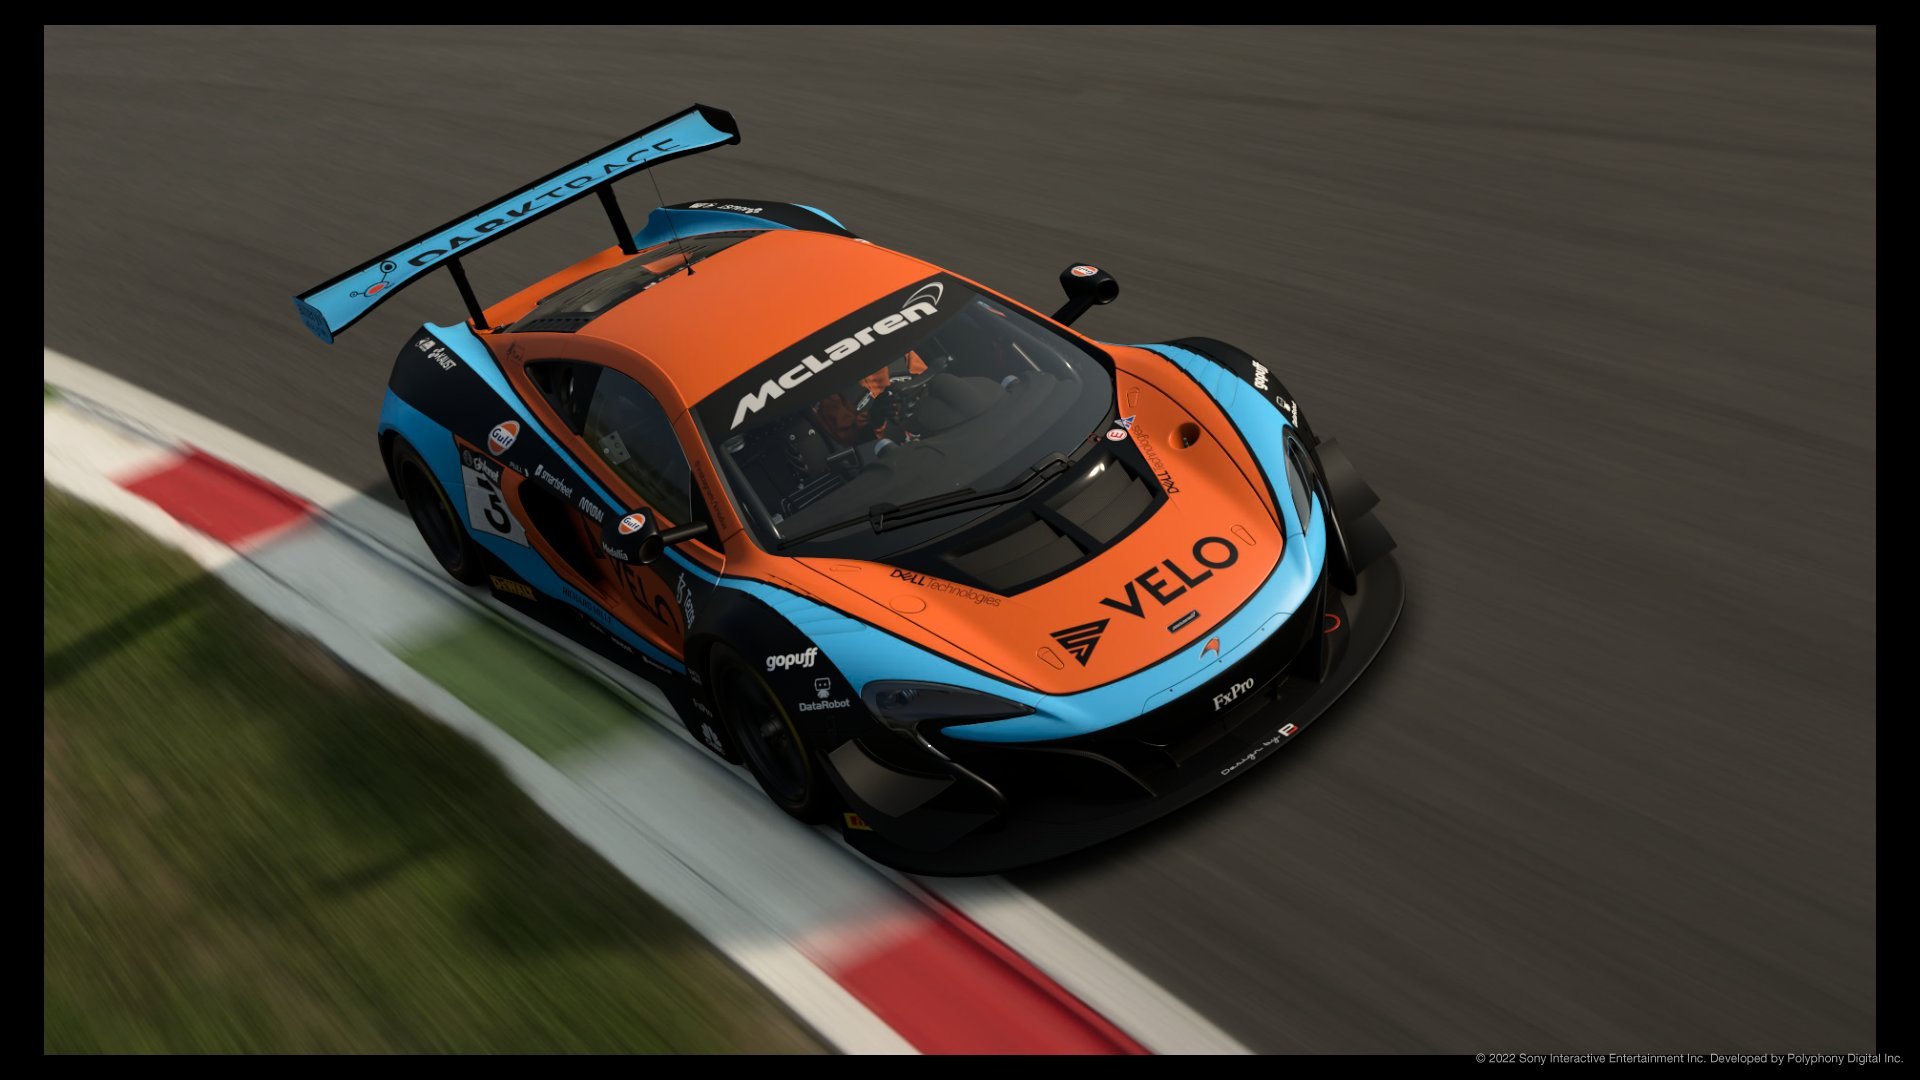 650S based on McLaren MCL36